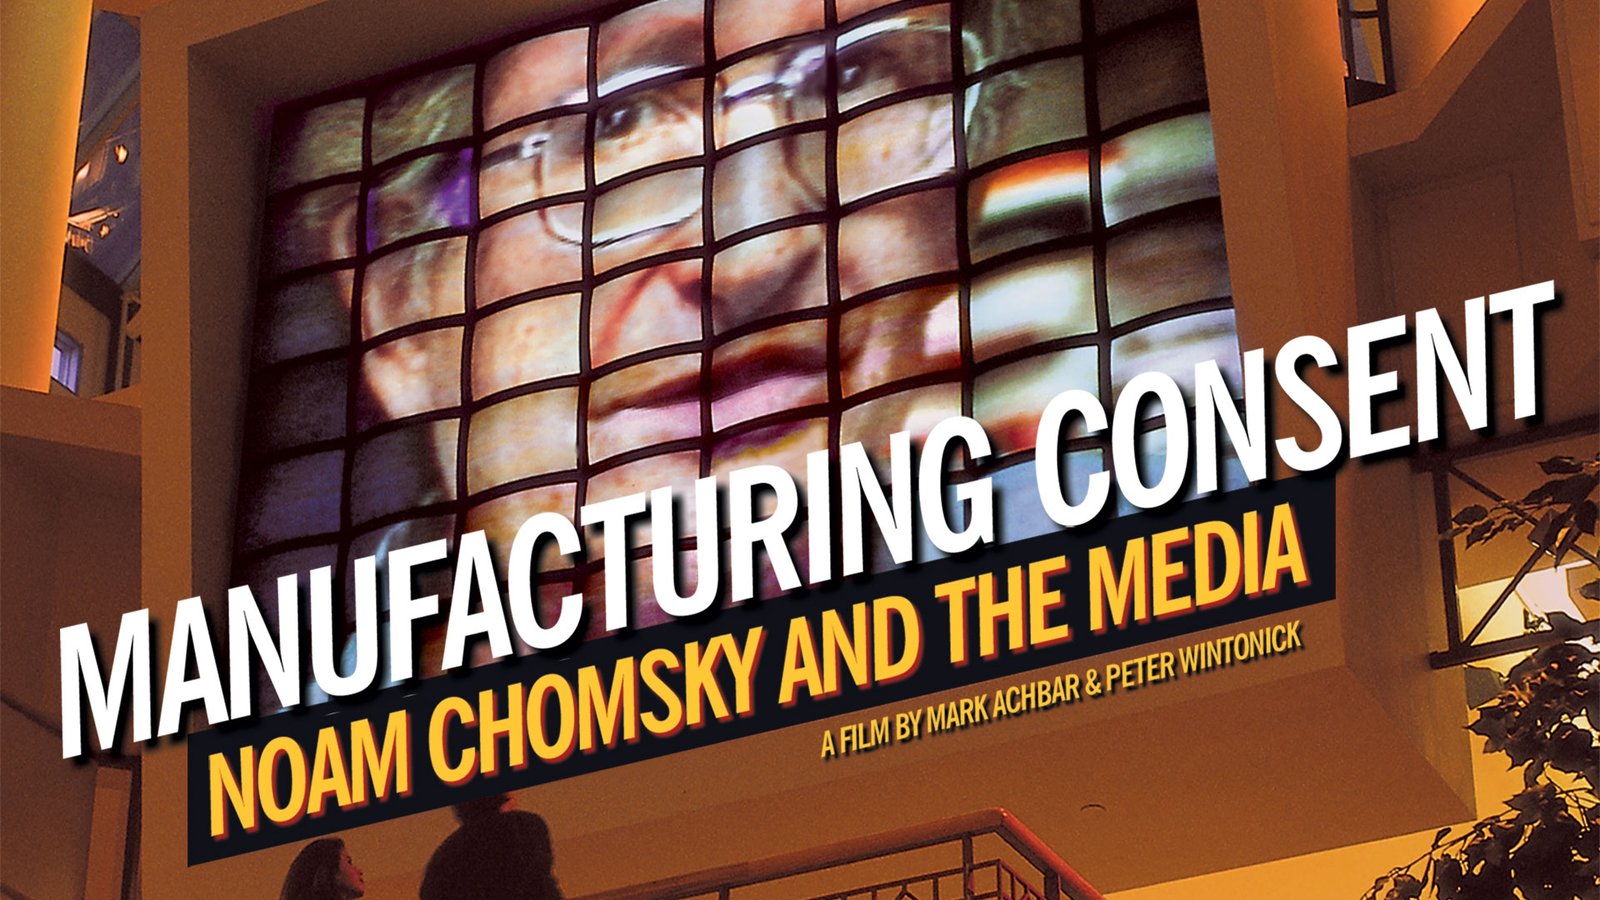 Manufacturing Consent - Noam Chomsky and the Media